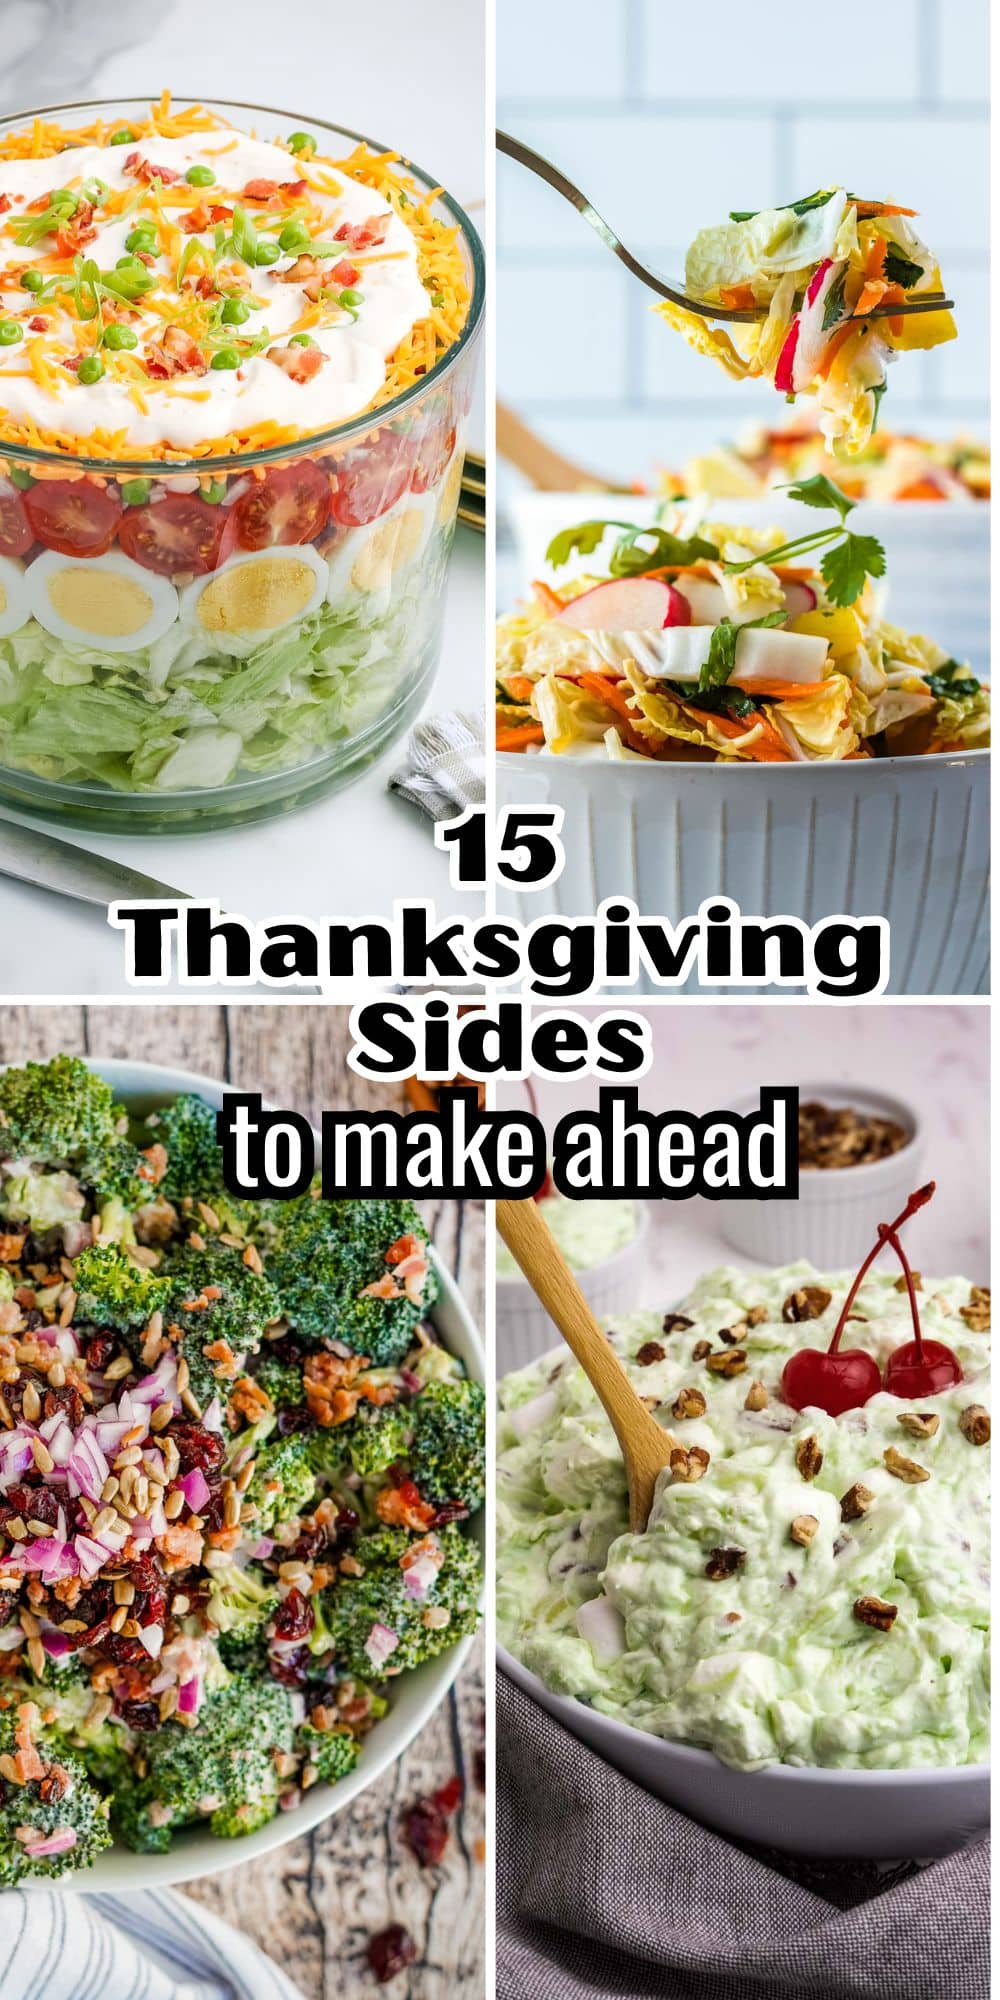 15 thanksgiving sides to make ahead.